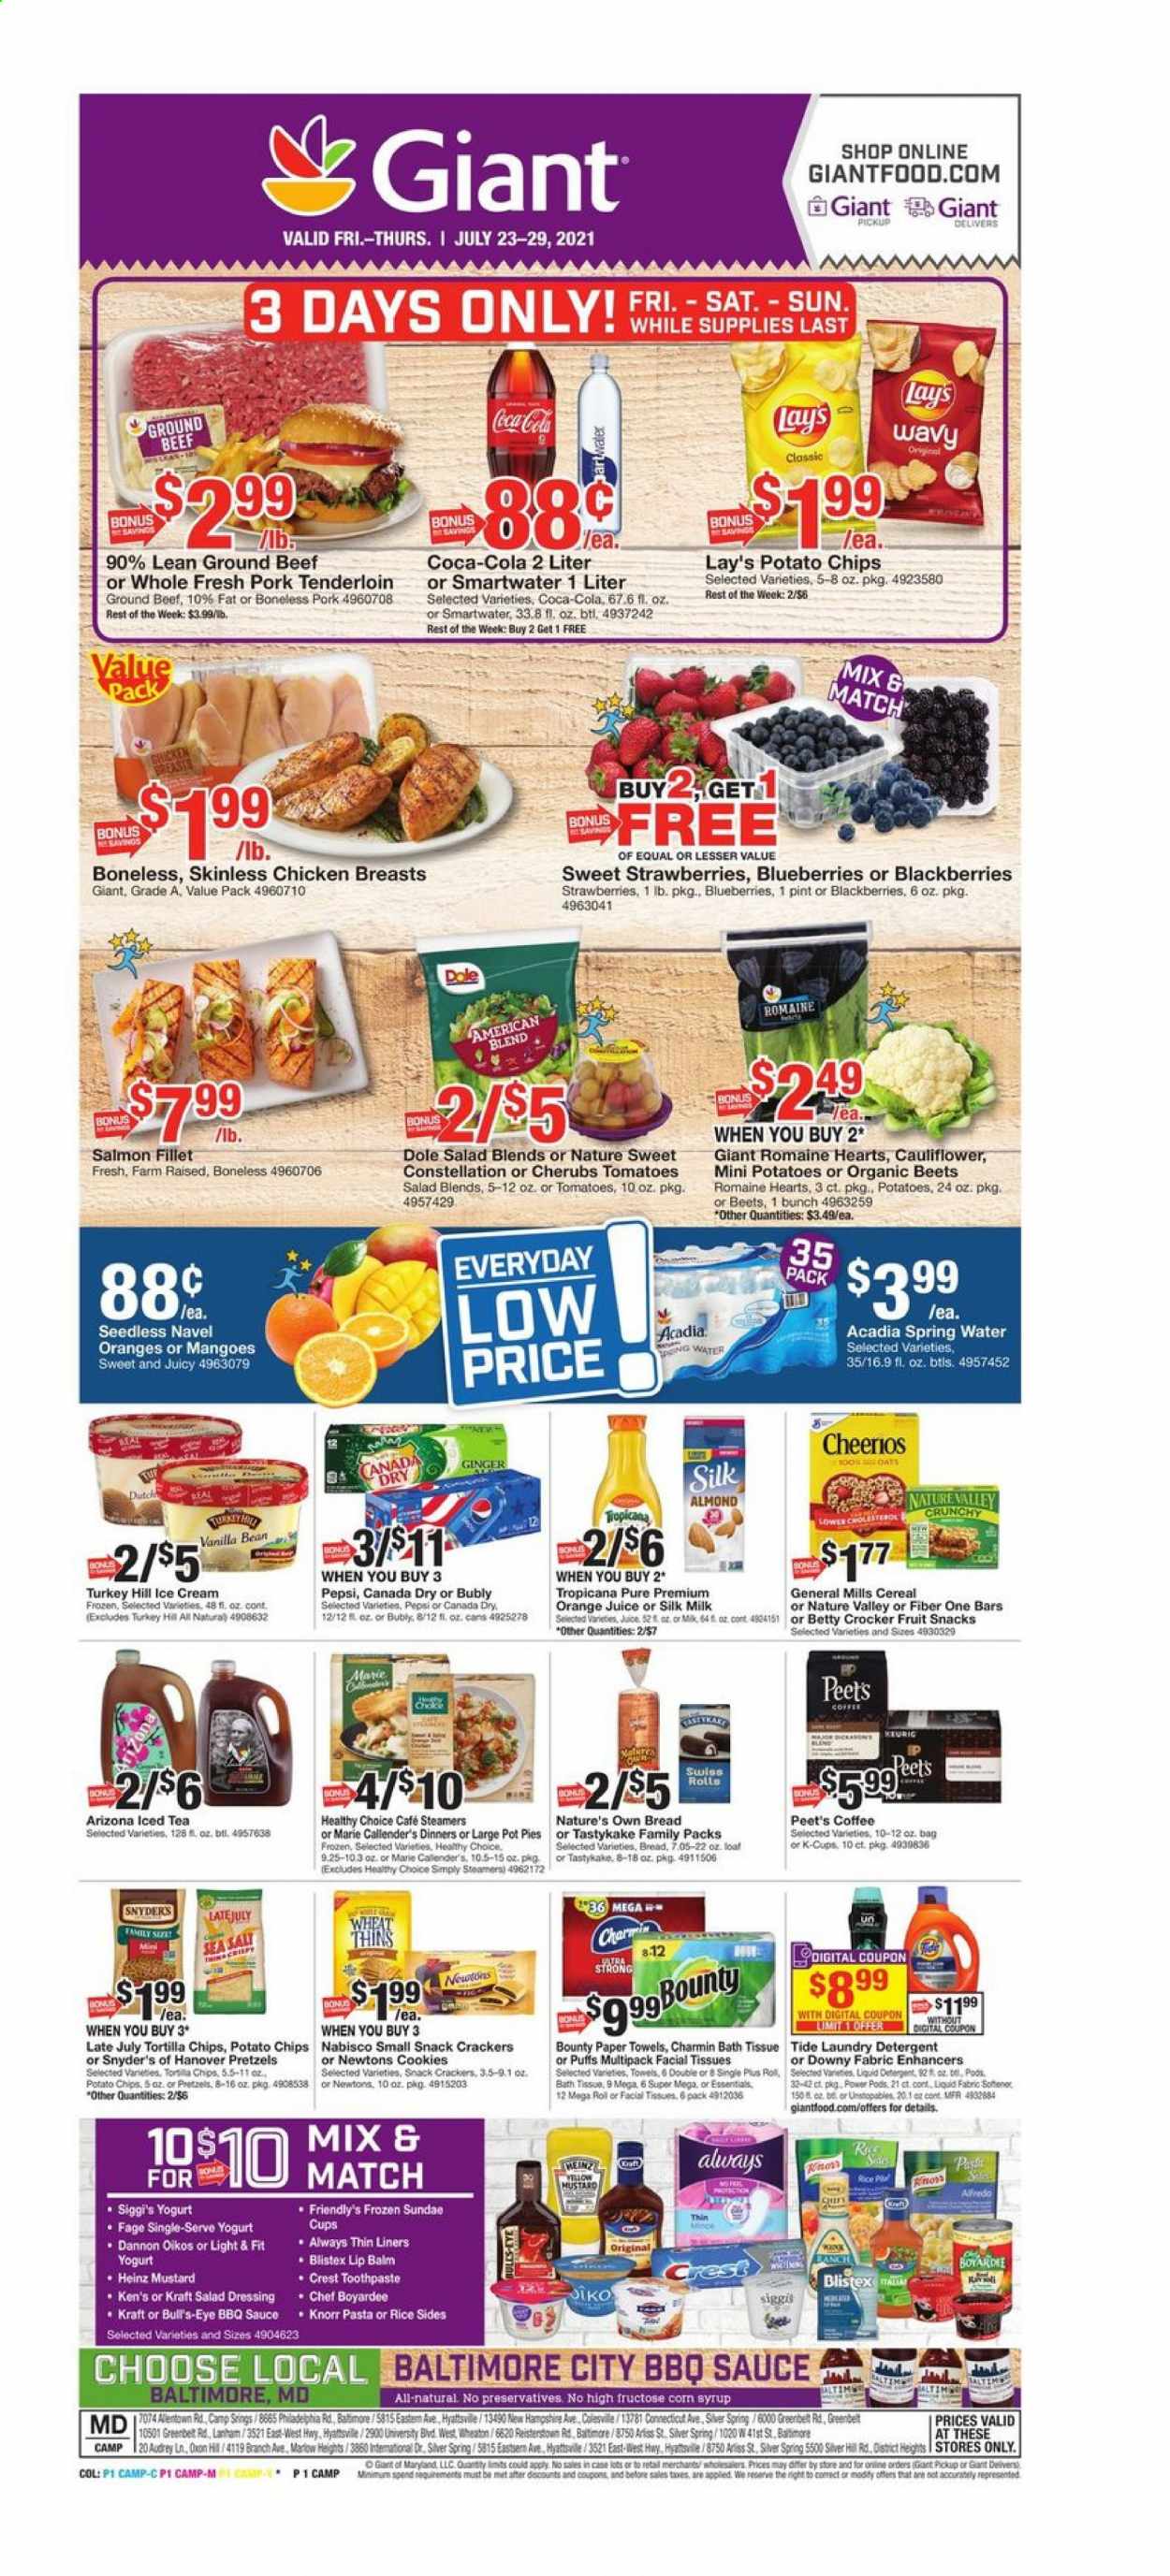 thumbnail - Giant Food Flyer - 07/23/2021 - 07/29/2021 - Sales products - pretzels, pot pie, puffs, ginger, Dole, blackberries, blueberries, salmon, salmon fillet, Knorr, sauce, Healthy Choice, Marie Callender's, Kraft®, yoghurt, Oikos, Dannon, milk, Silk, ice cream, Friendly's Ice Cream, cookies, Bounty, crackers, fruit snack, tortilla chips, potato chips, Lay’s, Thins, Heinz, Chef Boyardee, cereals, Cheerios, Nature Valley, Fiber One, rice, BBQ sauce, mustard, salad dressing, dressing, syrup, Canada Dry, Coca-Cola, Pepsi, orange juice, juice, ice tea, AriZona, spring water, Acadia, Smartwater, coffee, coffee capsules, K-Cups, Keurig, chicken breasts, beef meat, ground beef, pork meat, pork tenderloin, bath tissue, kitchen towels, paper towels, Charmin, detergent, Tide, Unstopables, laundry detergent, Downy Laundry, toothpaste, Crest, facial tissues, lip balm, Nature's Own, navel oranges. Page 1.